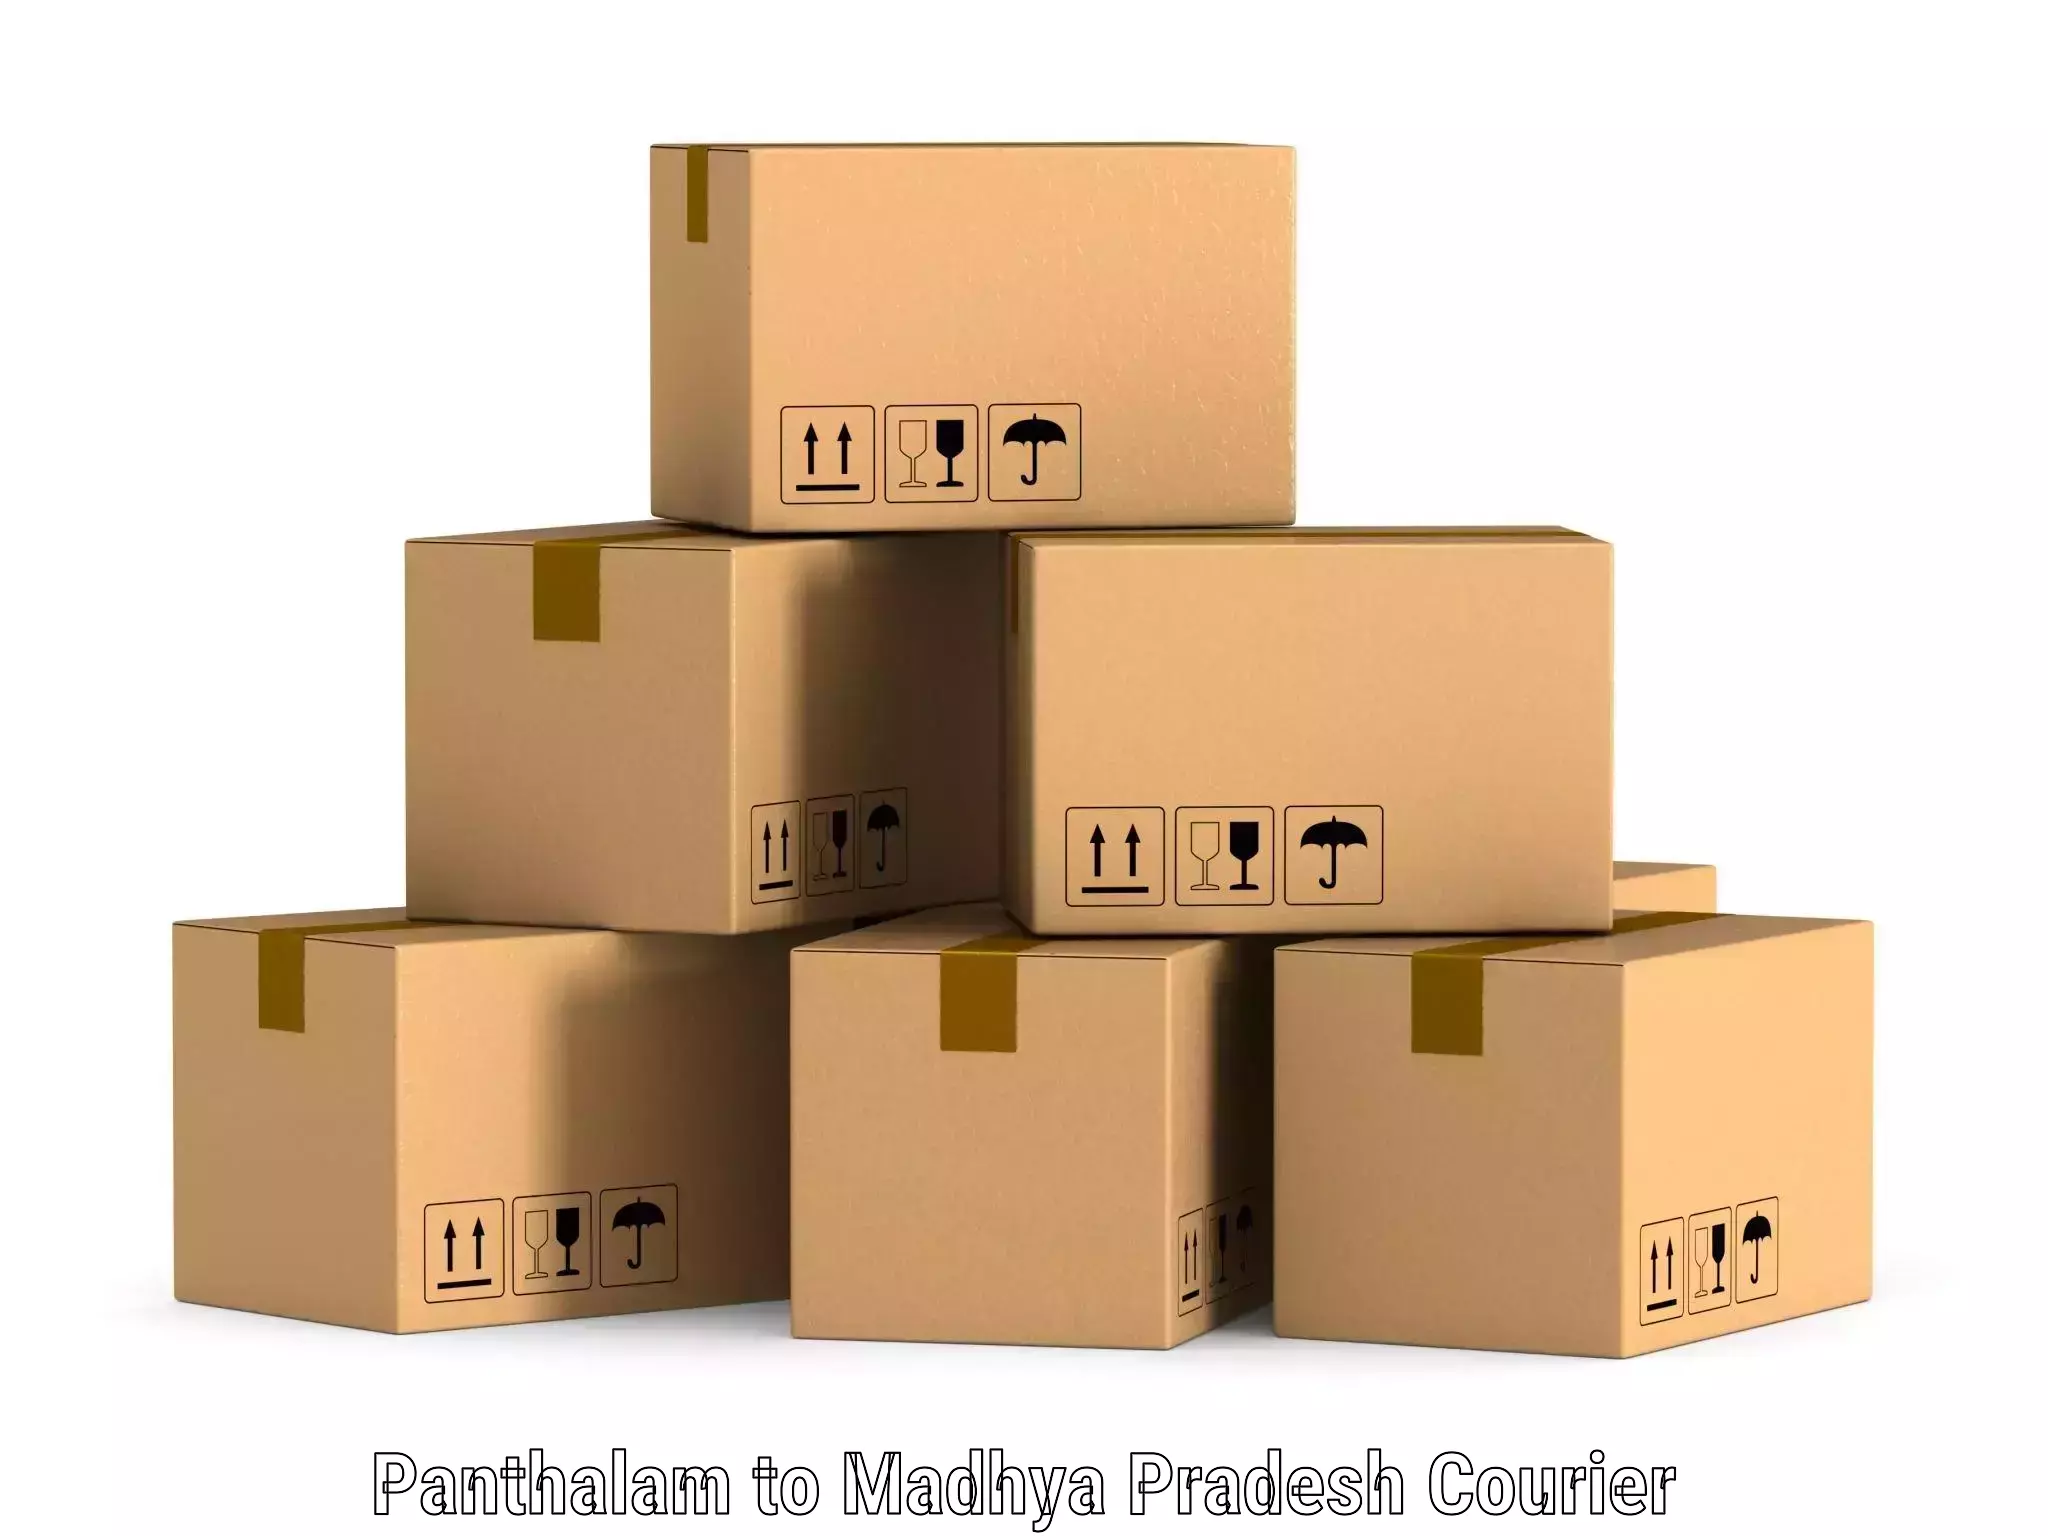 Full-service courier options in Panthalam to Madhya Pradesh